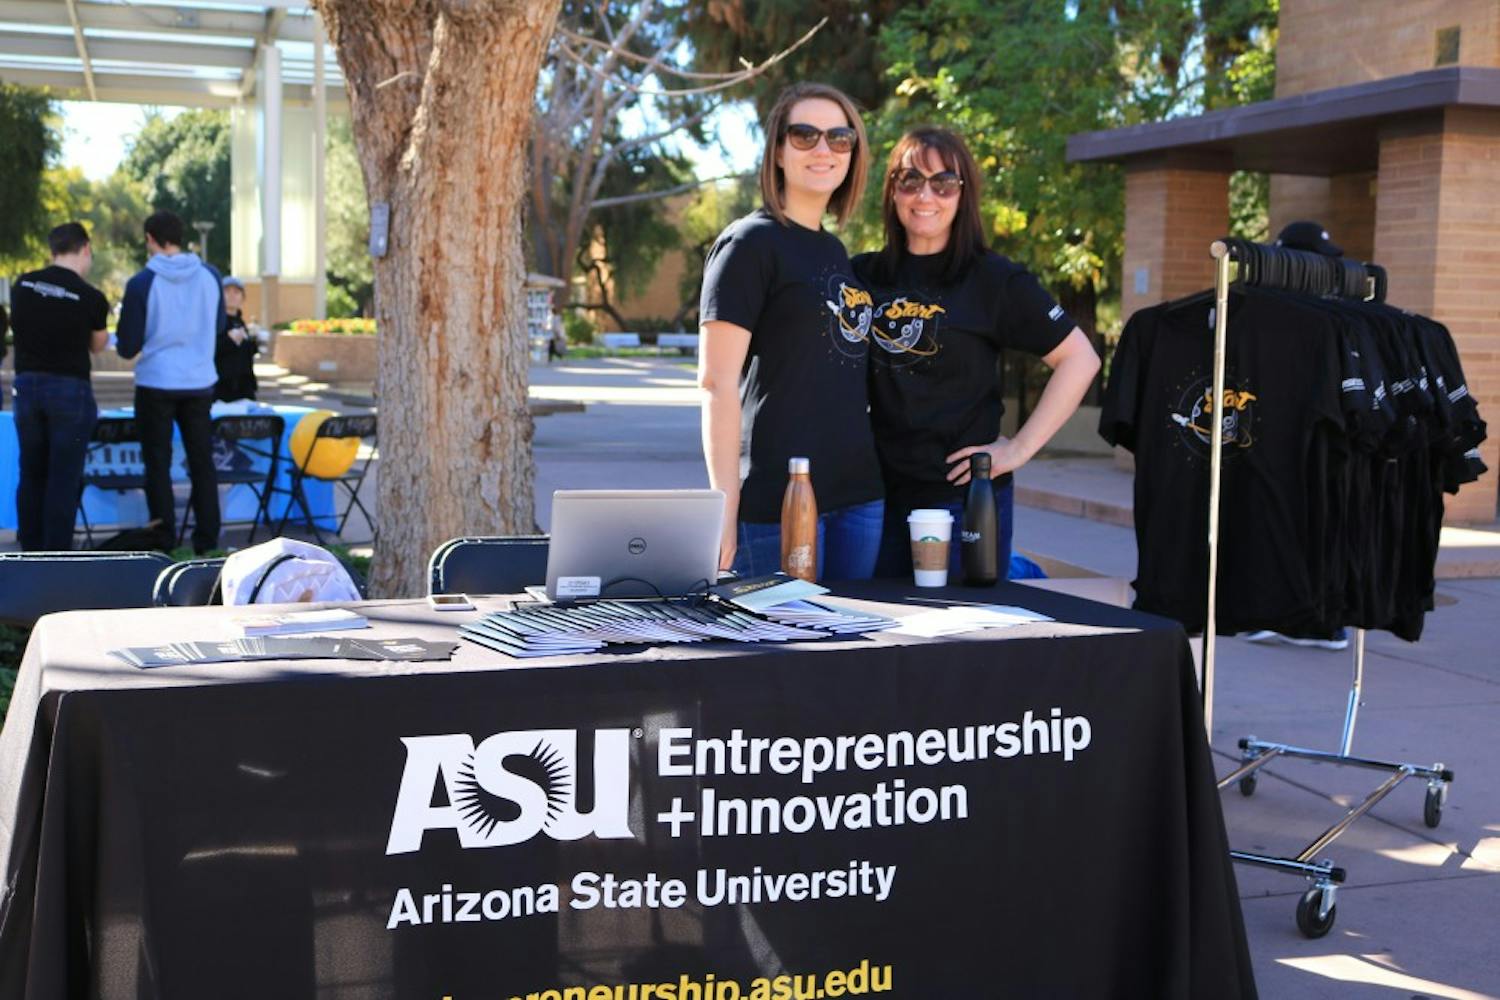 Program Manager&nbsp;Lauren Dunning (left) poses for a photo&nbsp;with her colleague at the Venture Devils table near the&nbsp;Memorial Union at the ASU Tempe campus&nbsp;on Wednesday, Feb. 1, 2017.